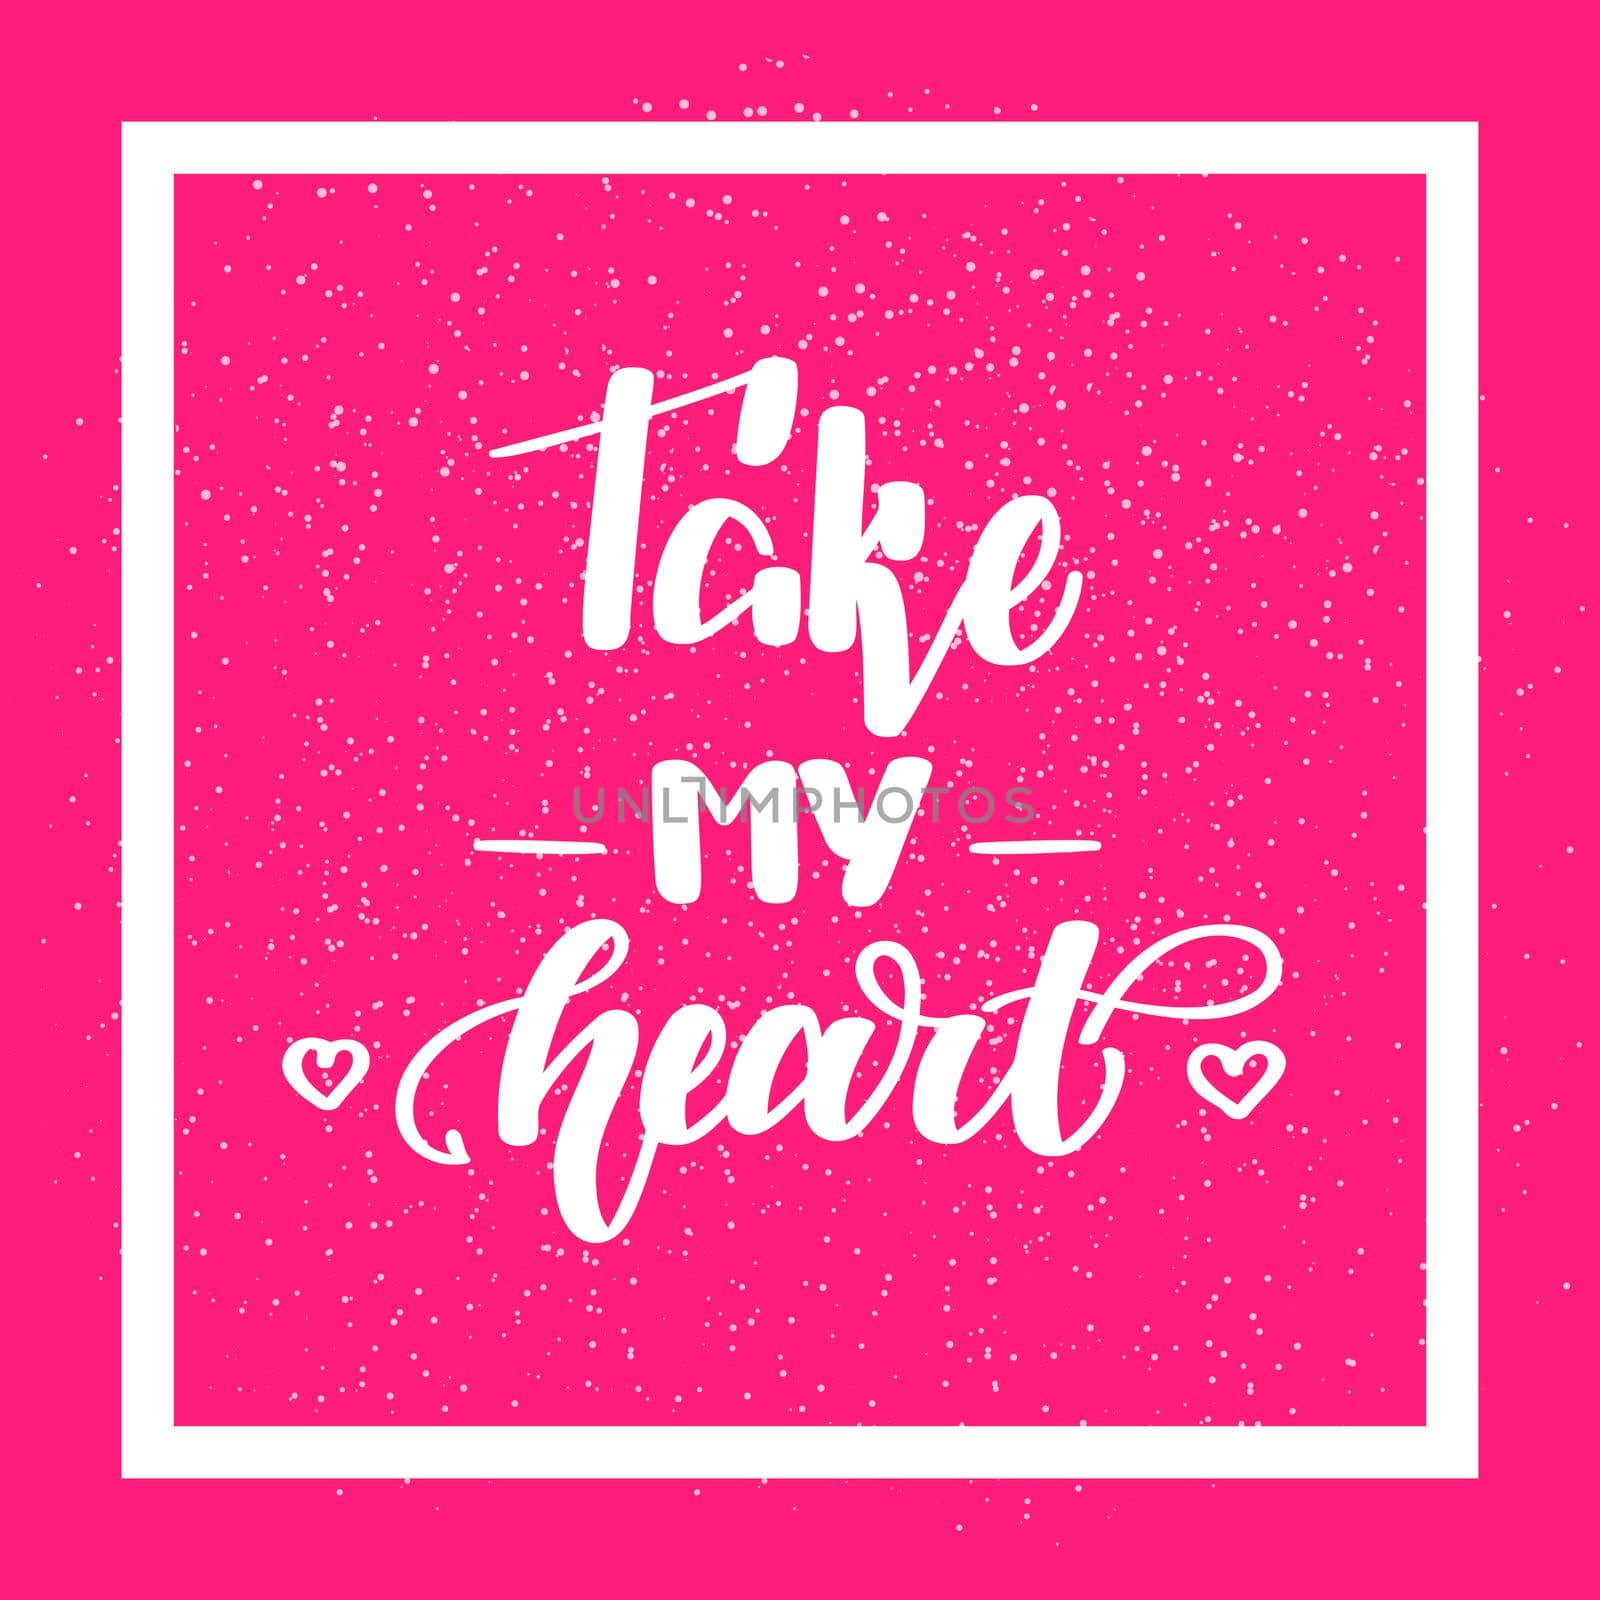 Take my heart. Romantic handwritten lettering on pink background. illustration for posters, cards and much more.